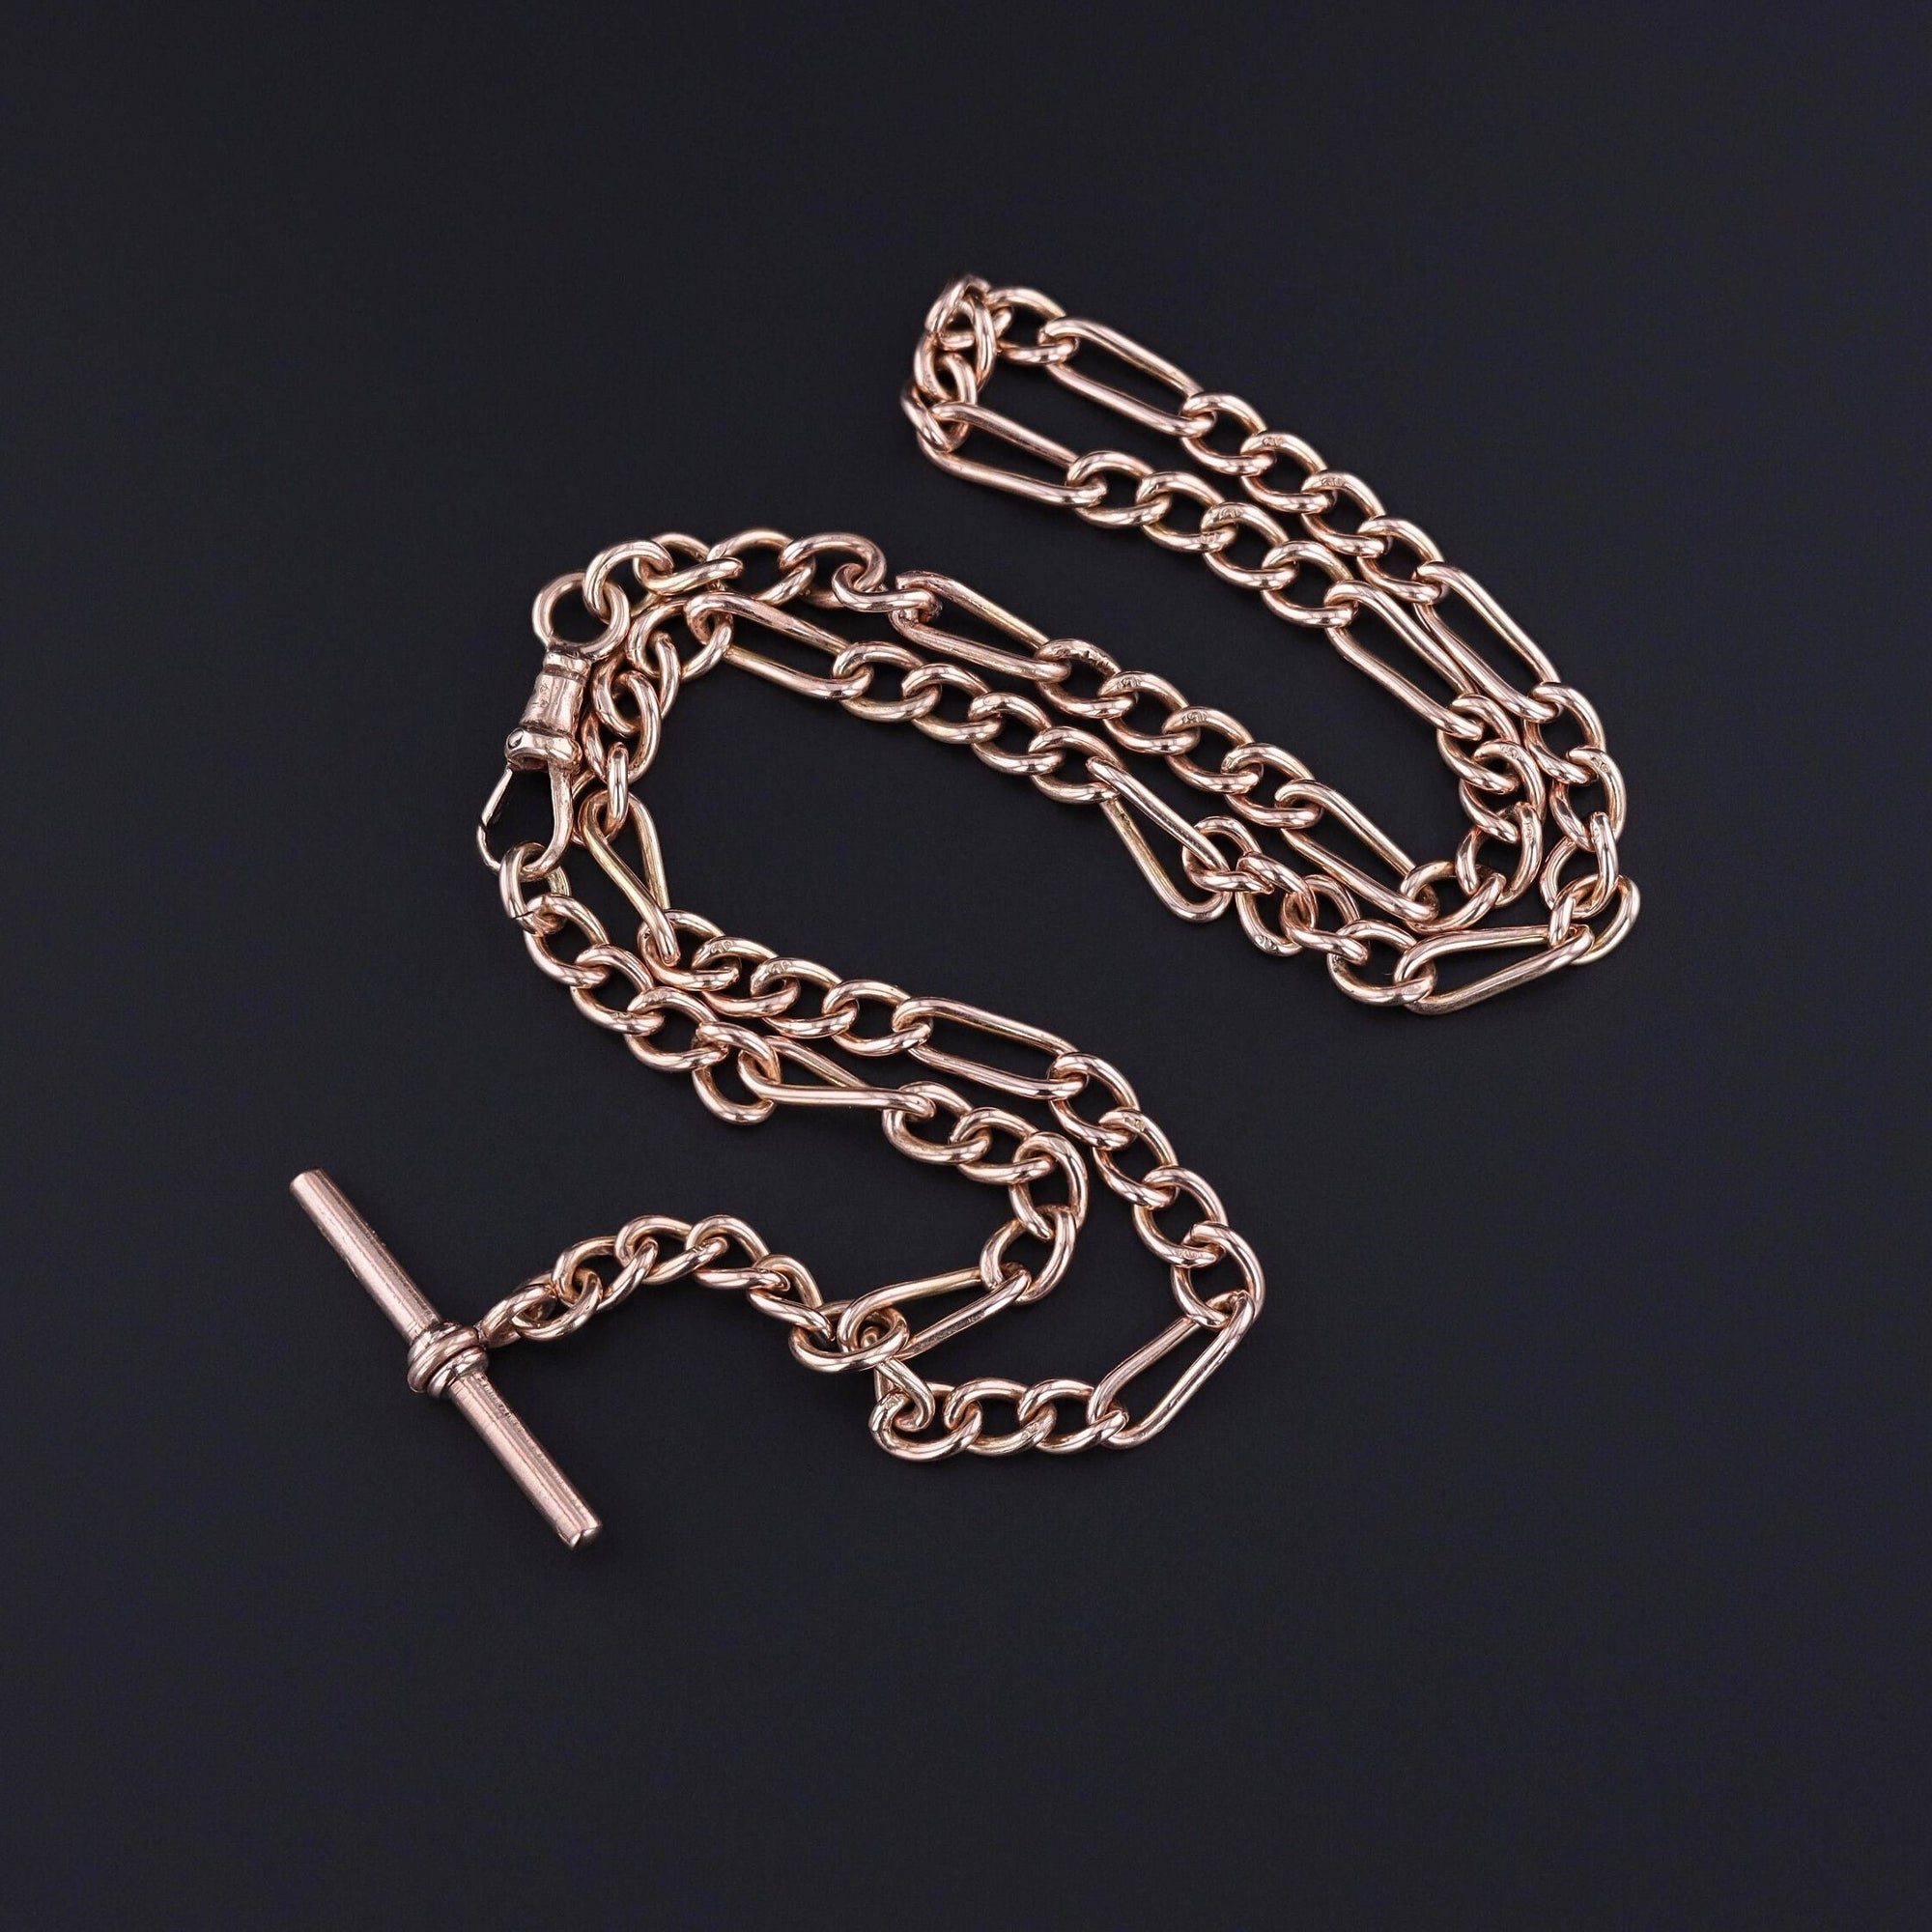 An antique gold watch chain from the early 1900s. The chain is 17 inches long with a T bar and additional 1 inch drop. It is stylish and perfect for any jewelry lover.